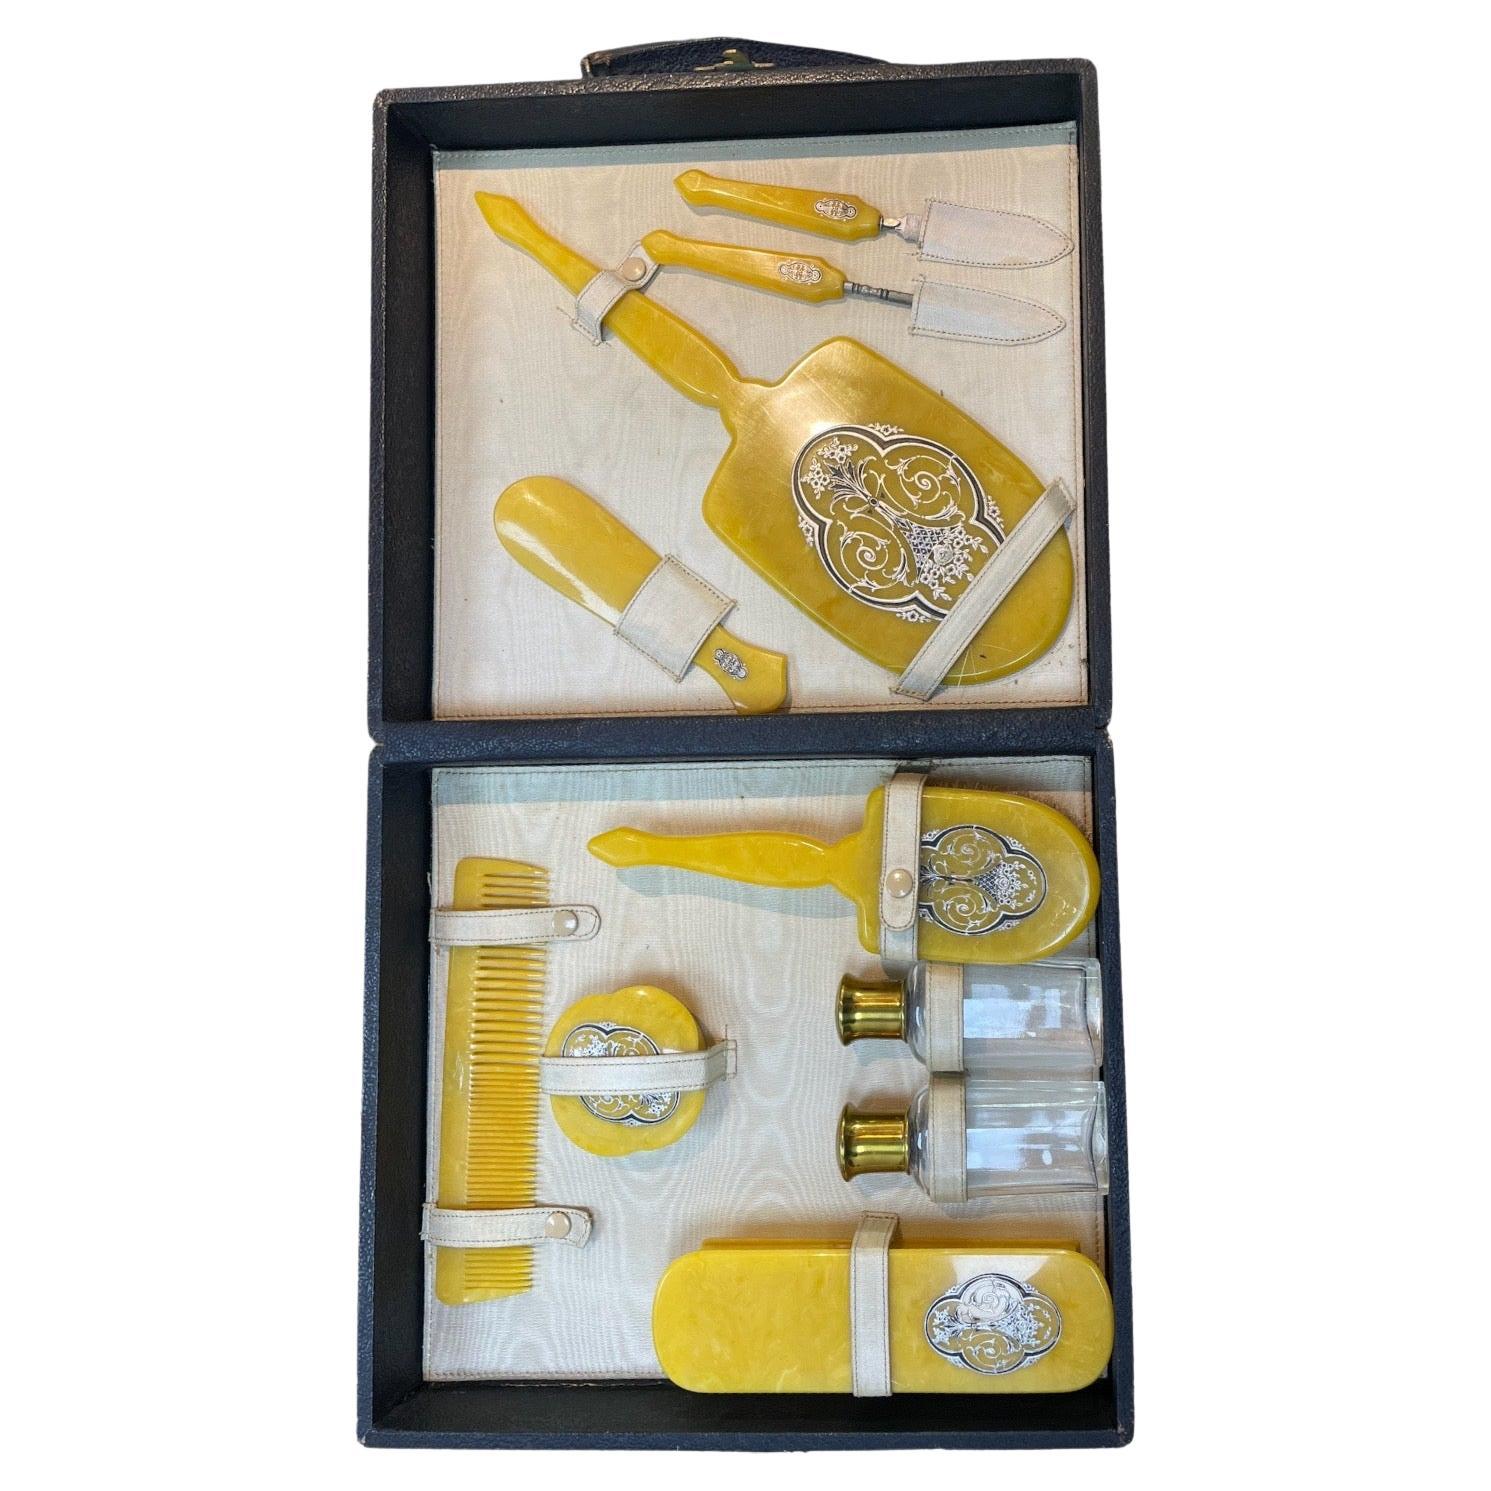 Antique Travel Grooming Kit